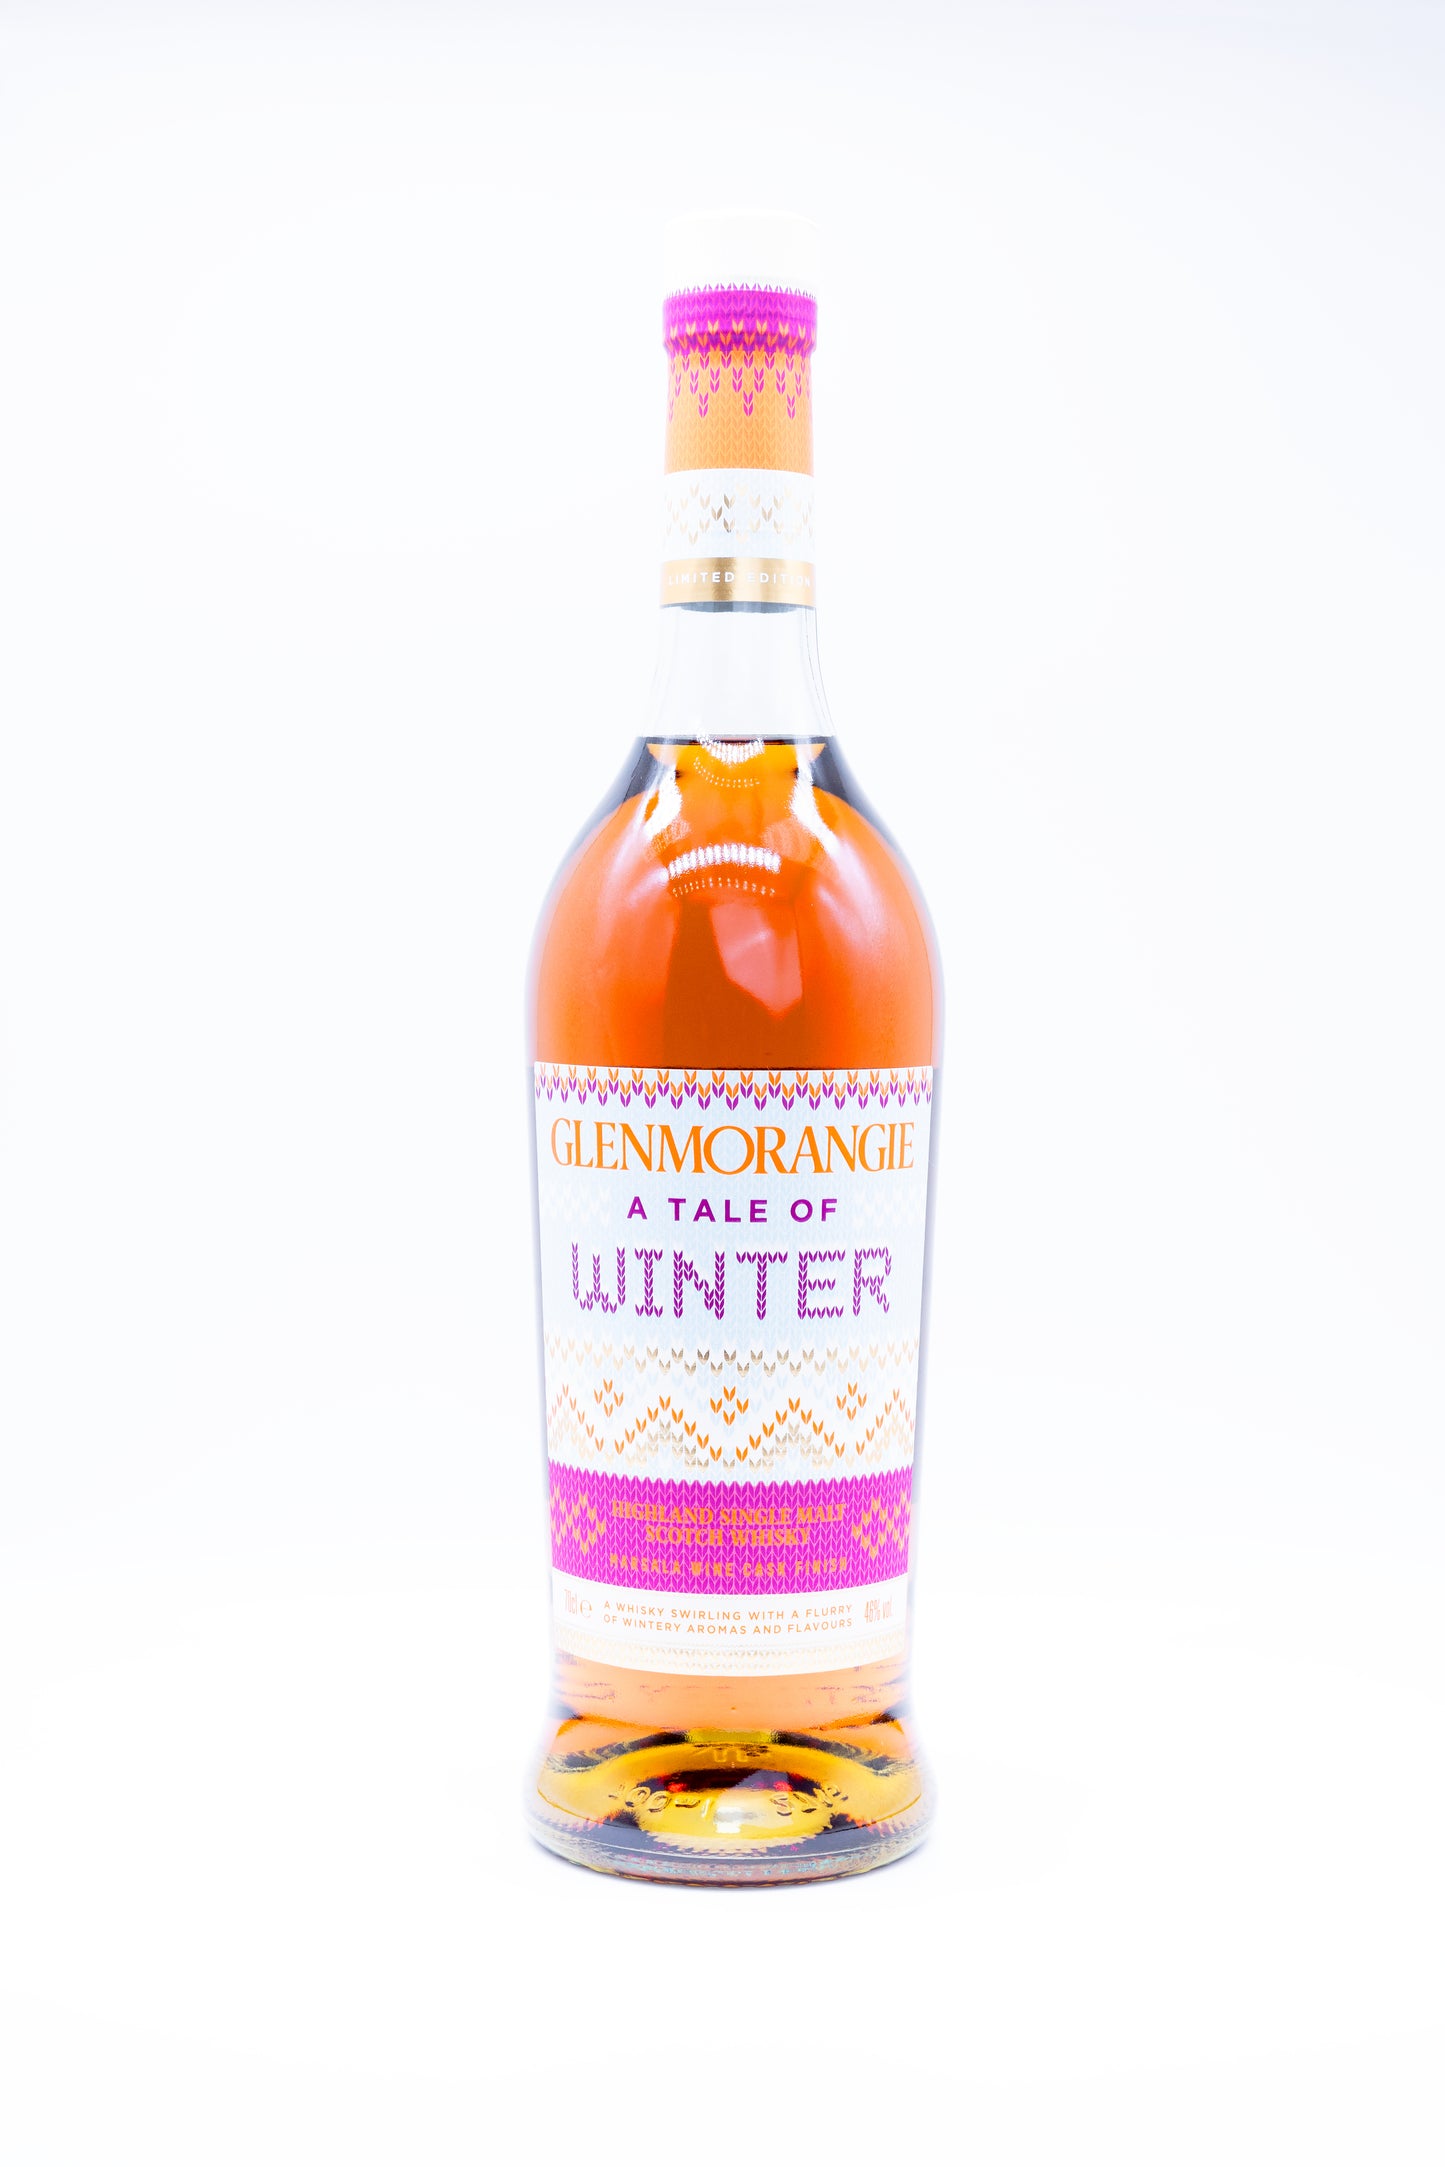 Glenmorangie A Tale Of Winter Limited Edition